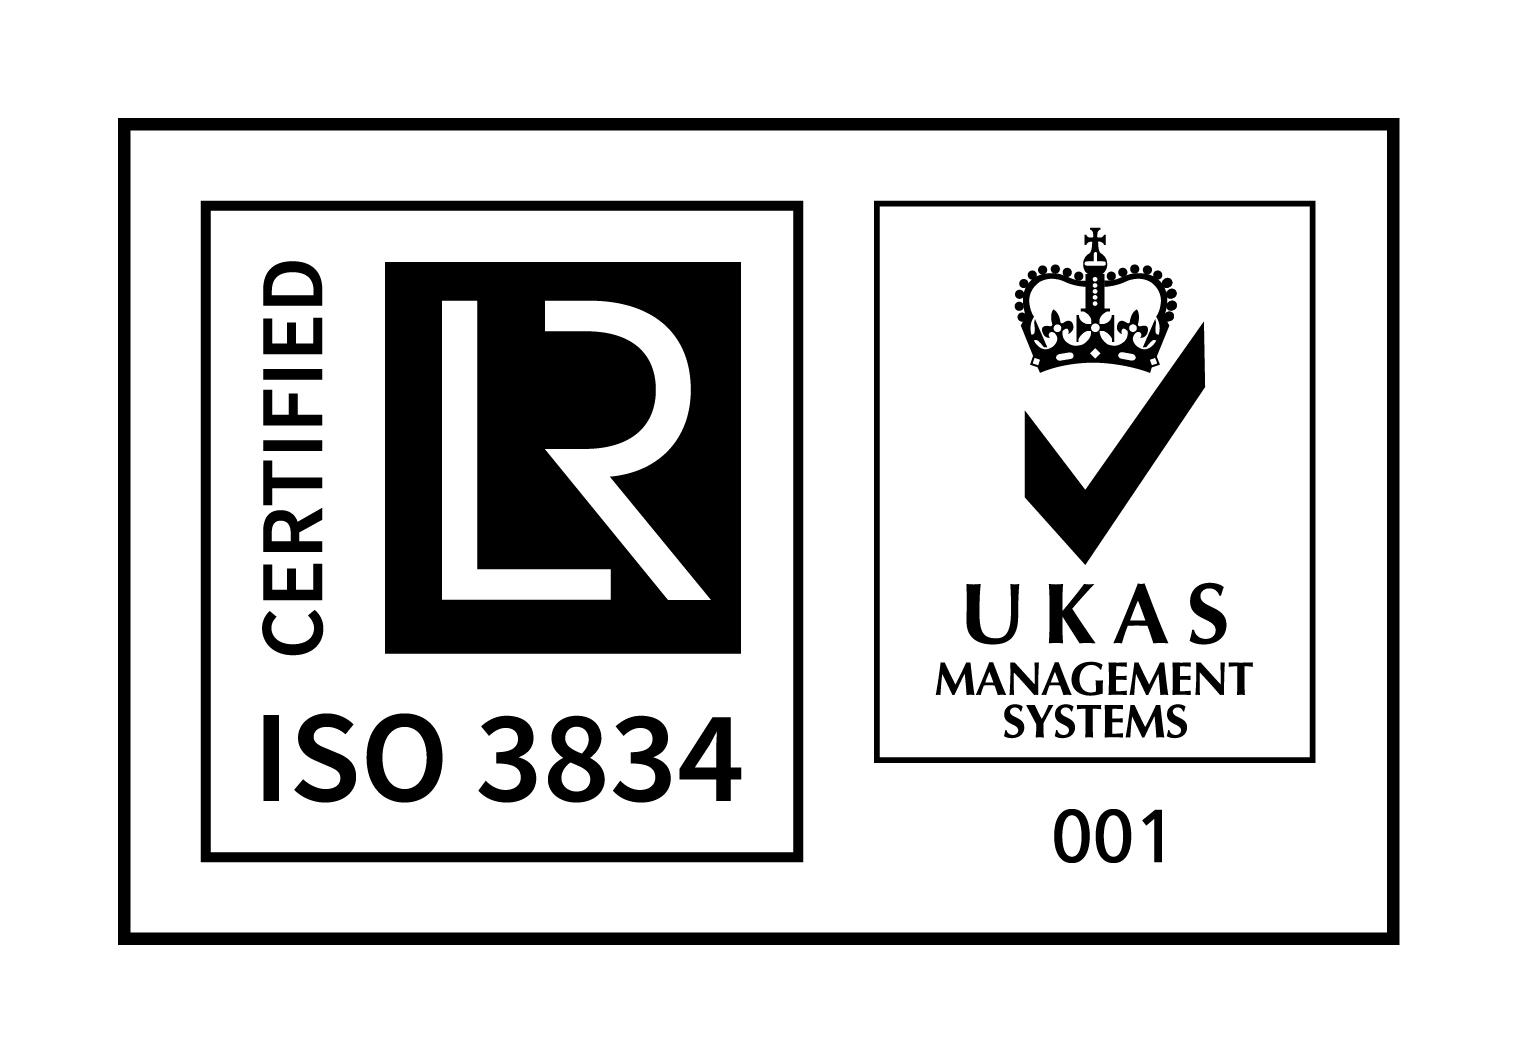 UKAS Management Systems - ISO 3834